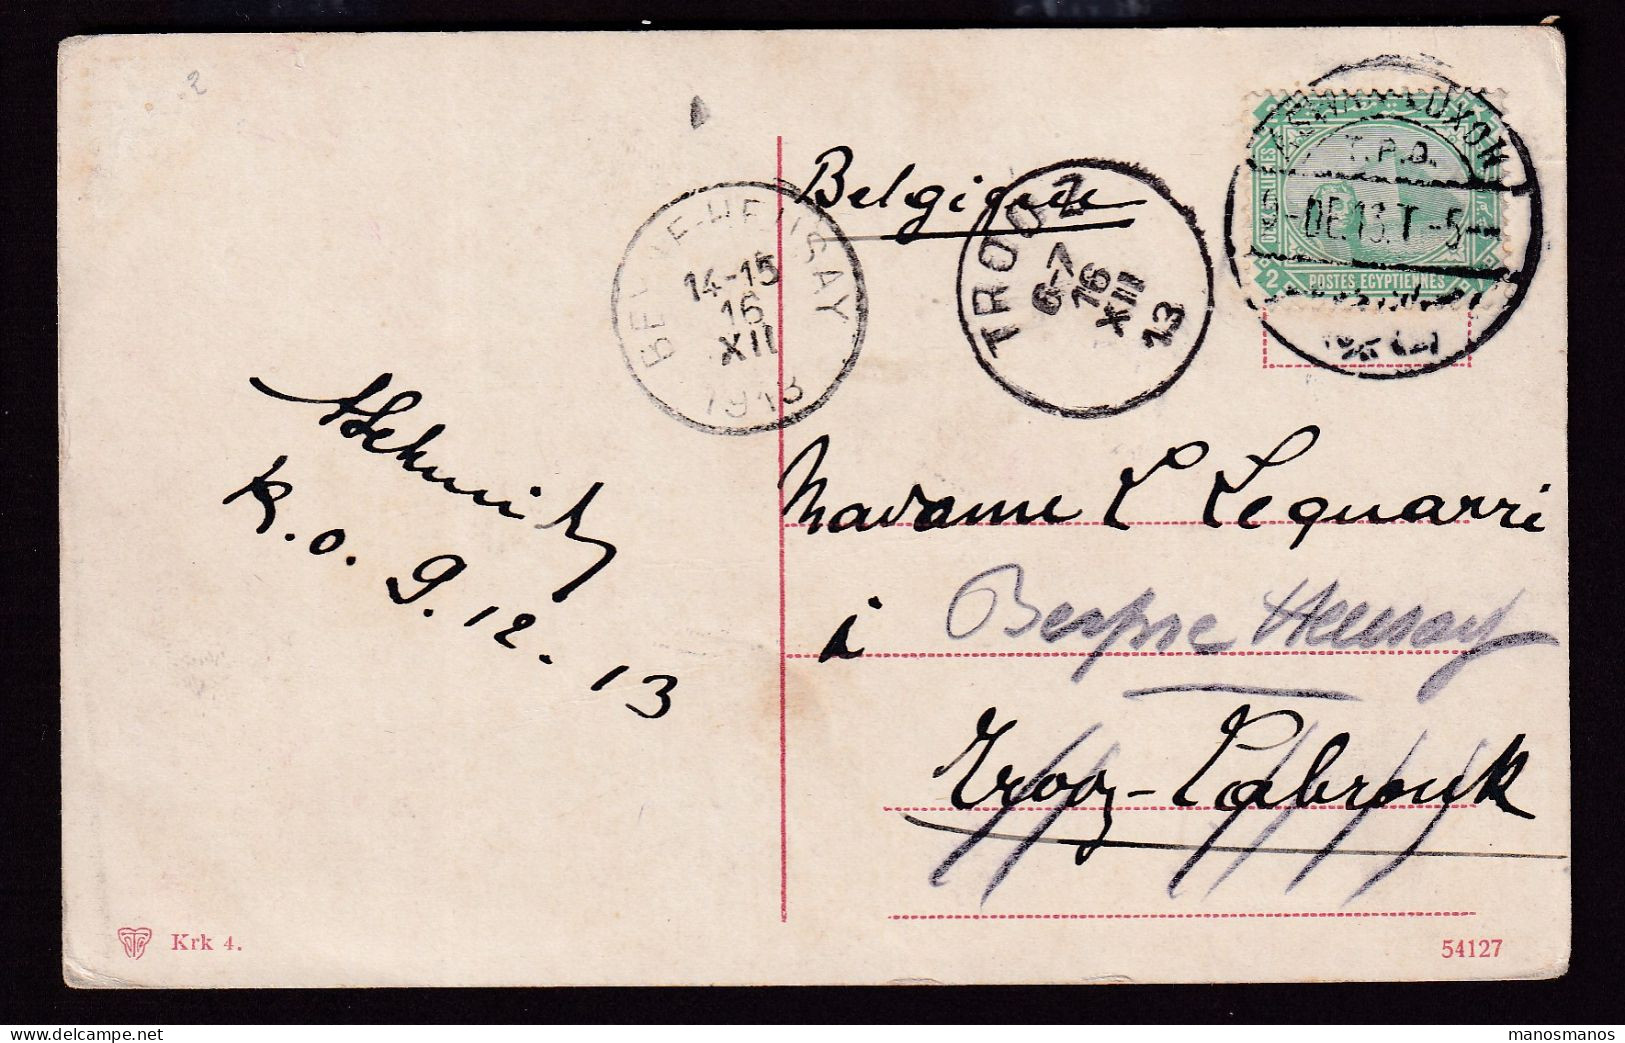 387/31 -- EGYPT ASWAN-LUXOR TPO (in Small Letters) - SCARCE Type  - Viewcard Cancelled 1913 To TROOZ Belgium - 1866-1914 Khedivaat Egypte